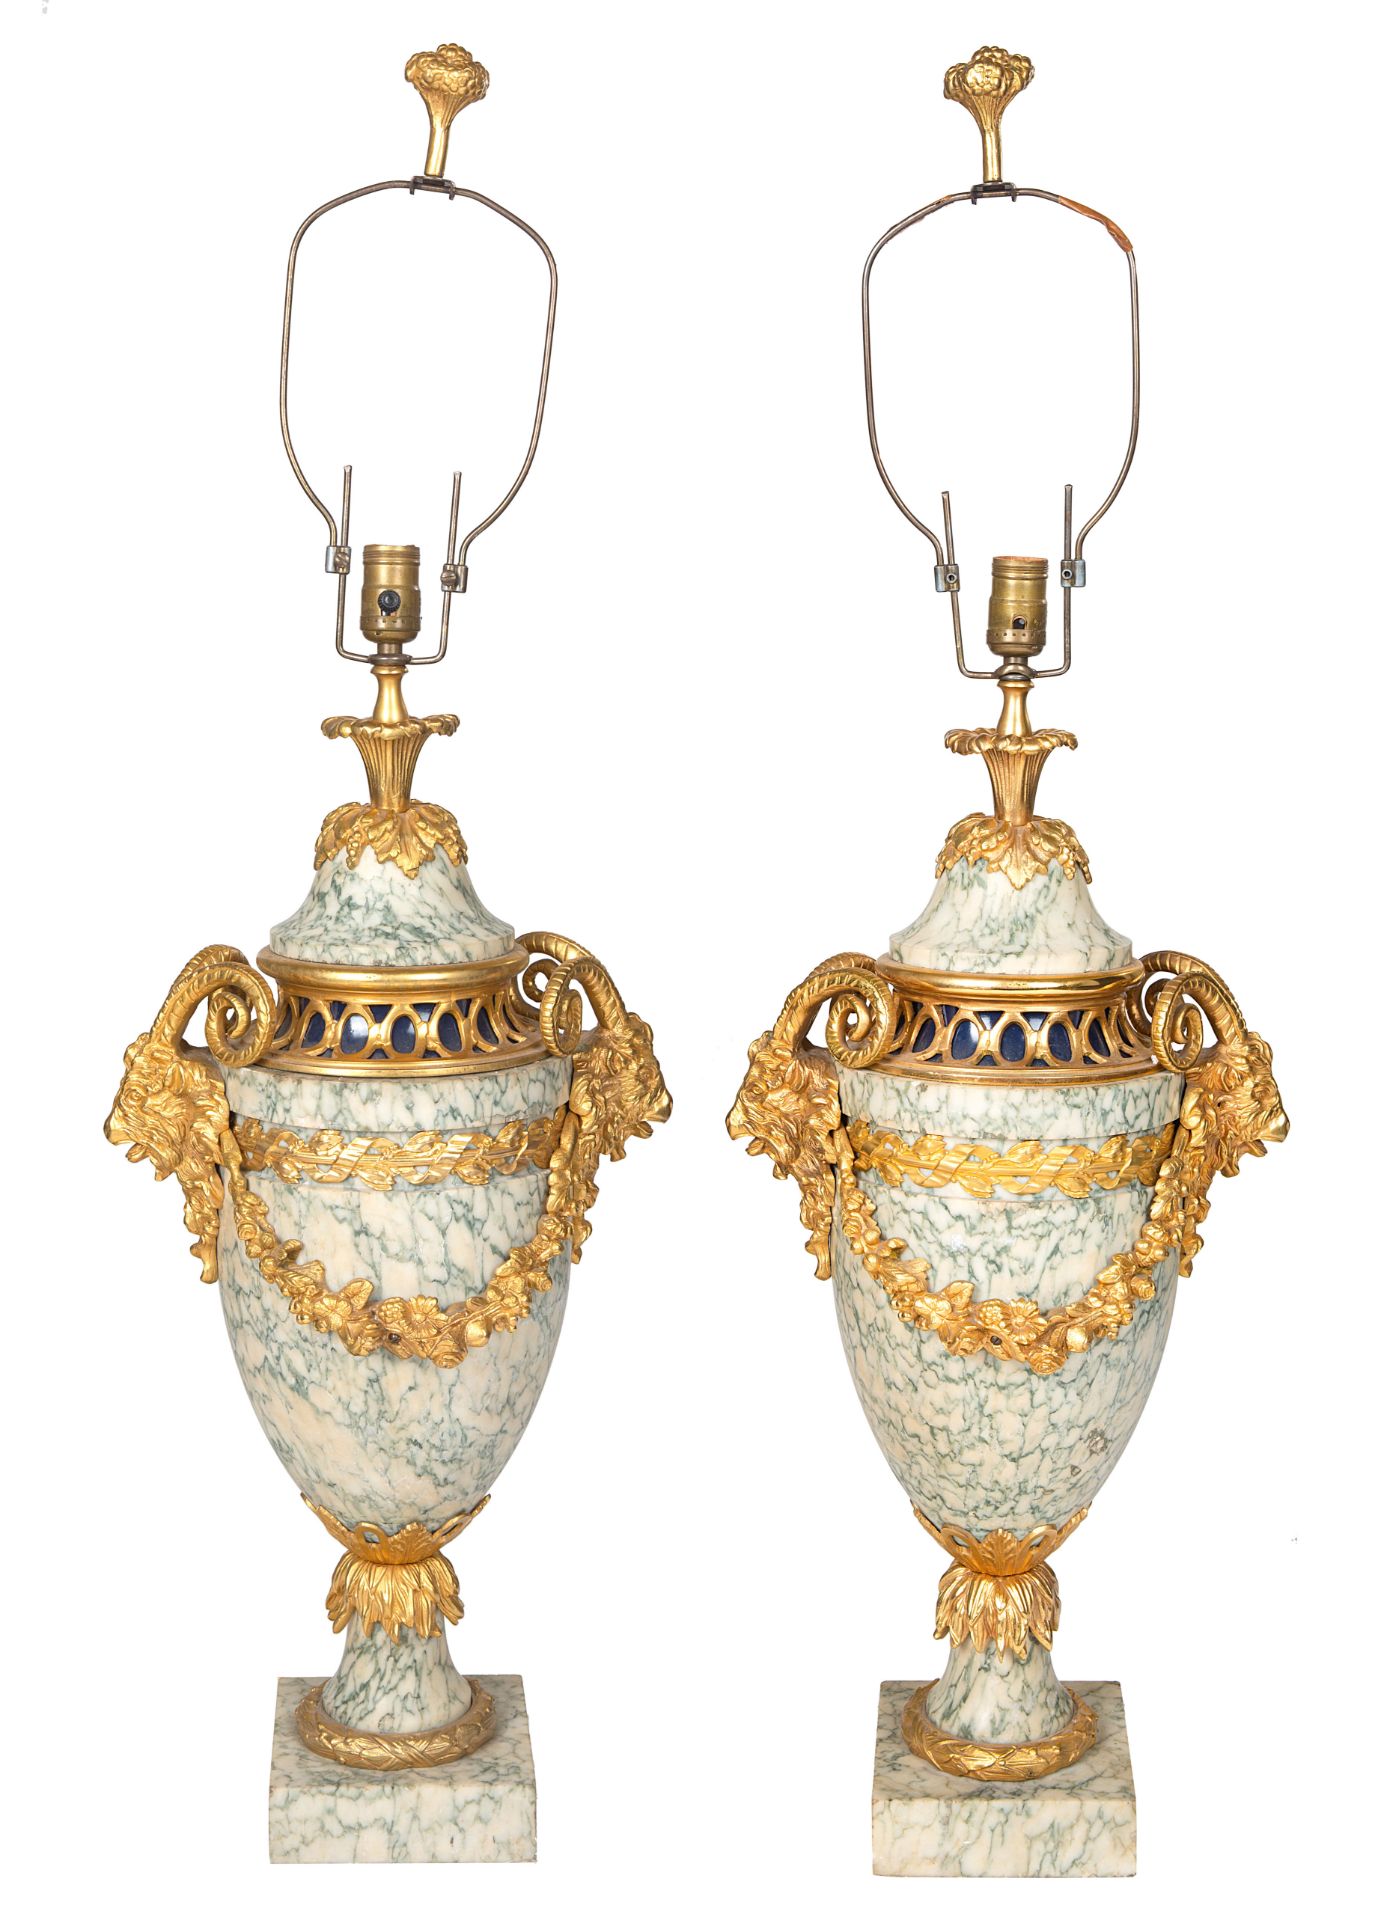 A PAIR OF FRENCH LOUIS XVI STYLE ORMOLU-MOUNTED MARBLE URNS, LATE 19TH CENTURY WITH LATER LAMP MOUNT - Bild 2 aus 2